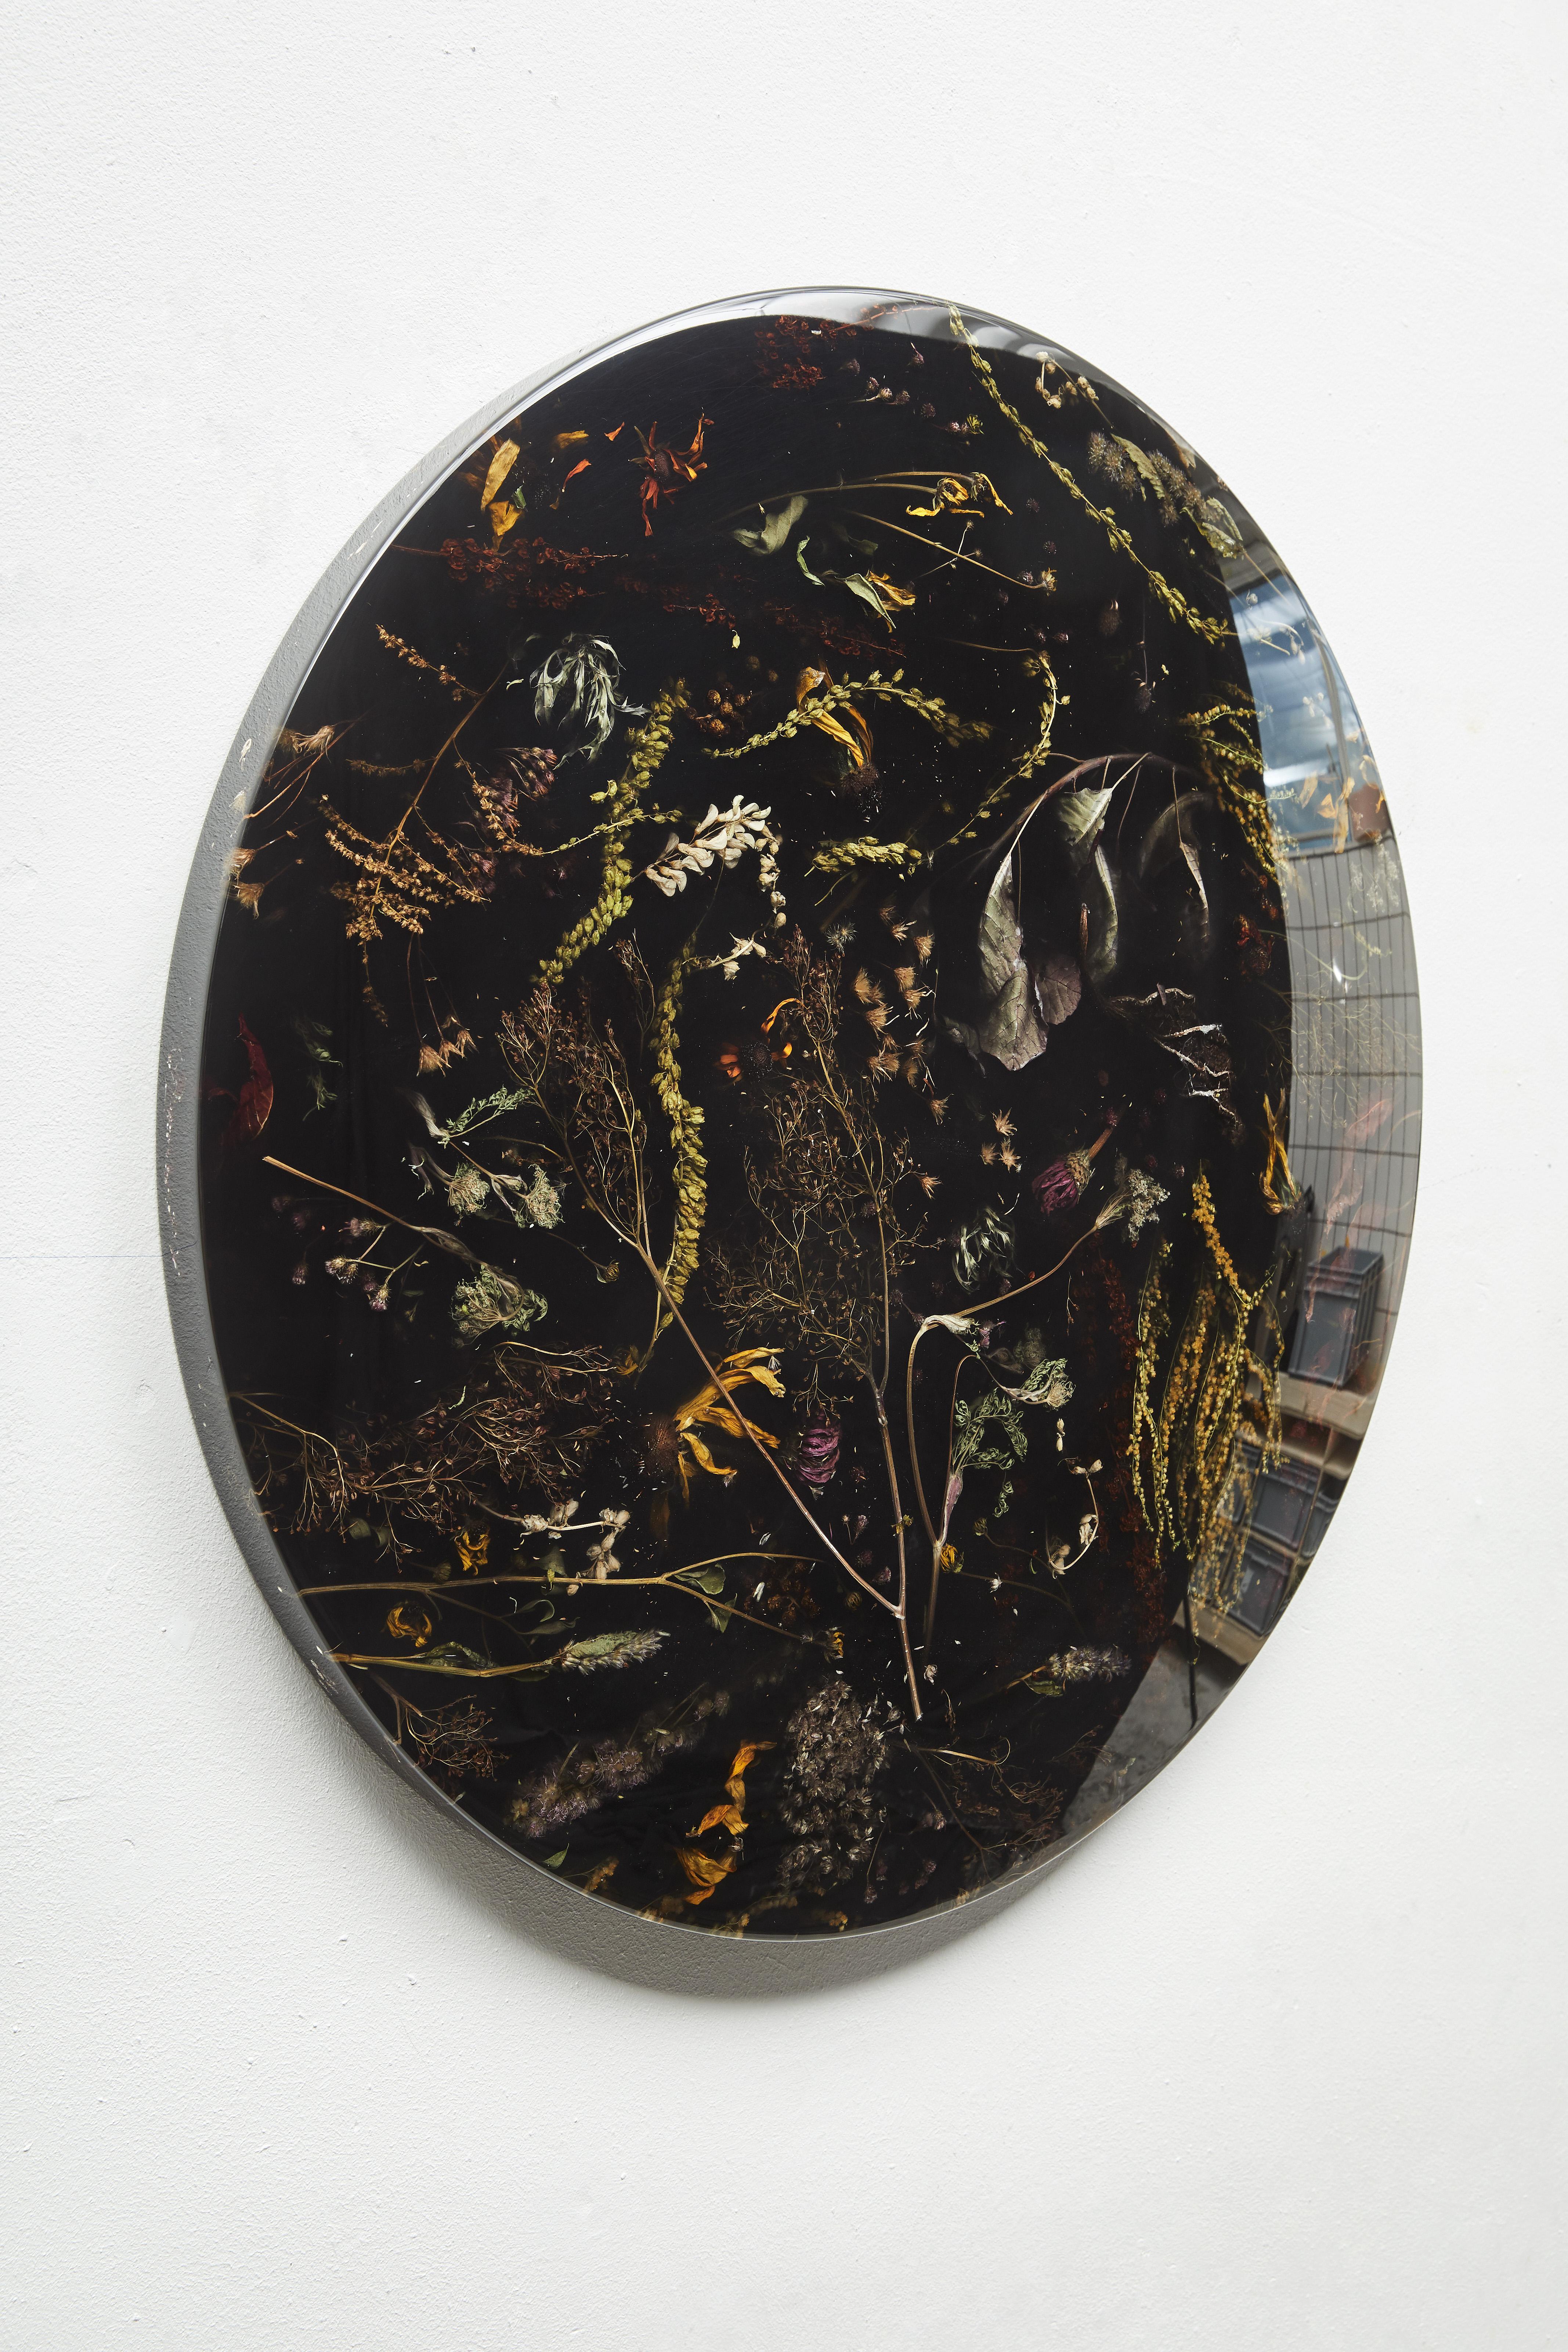 Part of Marcin Rusak’s signature Flora collection, the wall-hanging Flora Lens 65 constitutes a unique decorative piece that works well in a variety of settings. Based on discarded flowers carefully submerged in resin, this convex piece is entirely